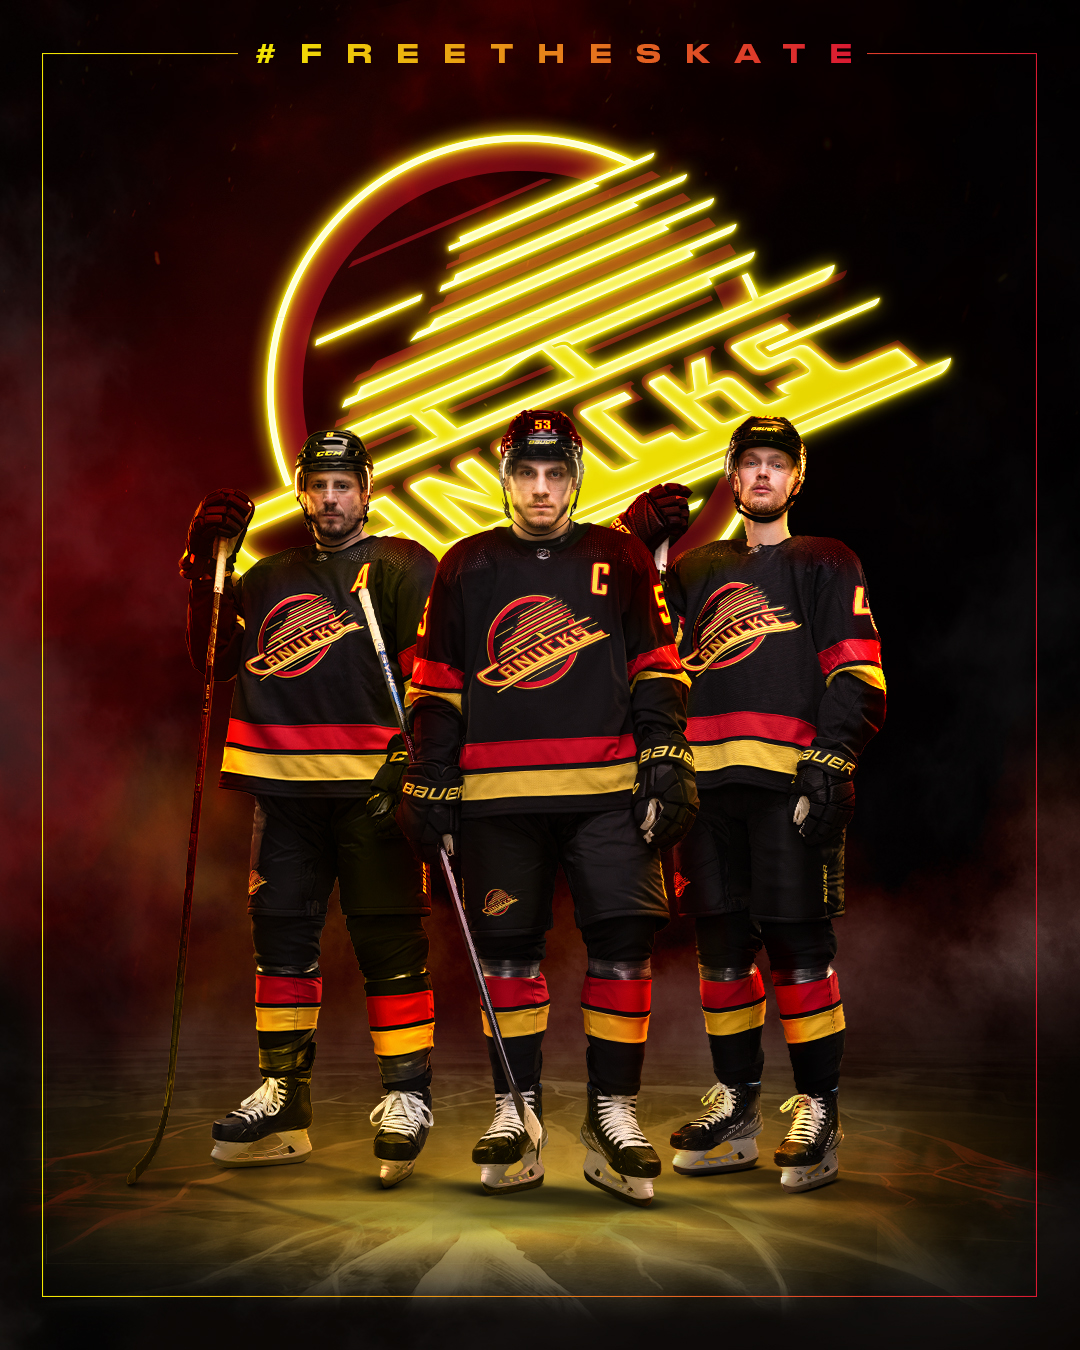 Vancouver Canucks updated their cover - Vancouver Canucks